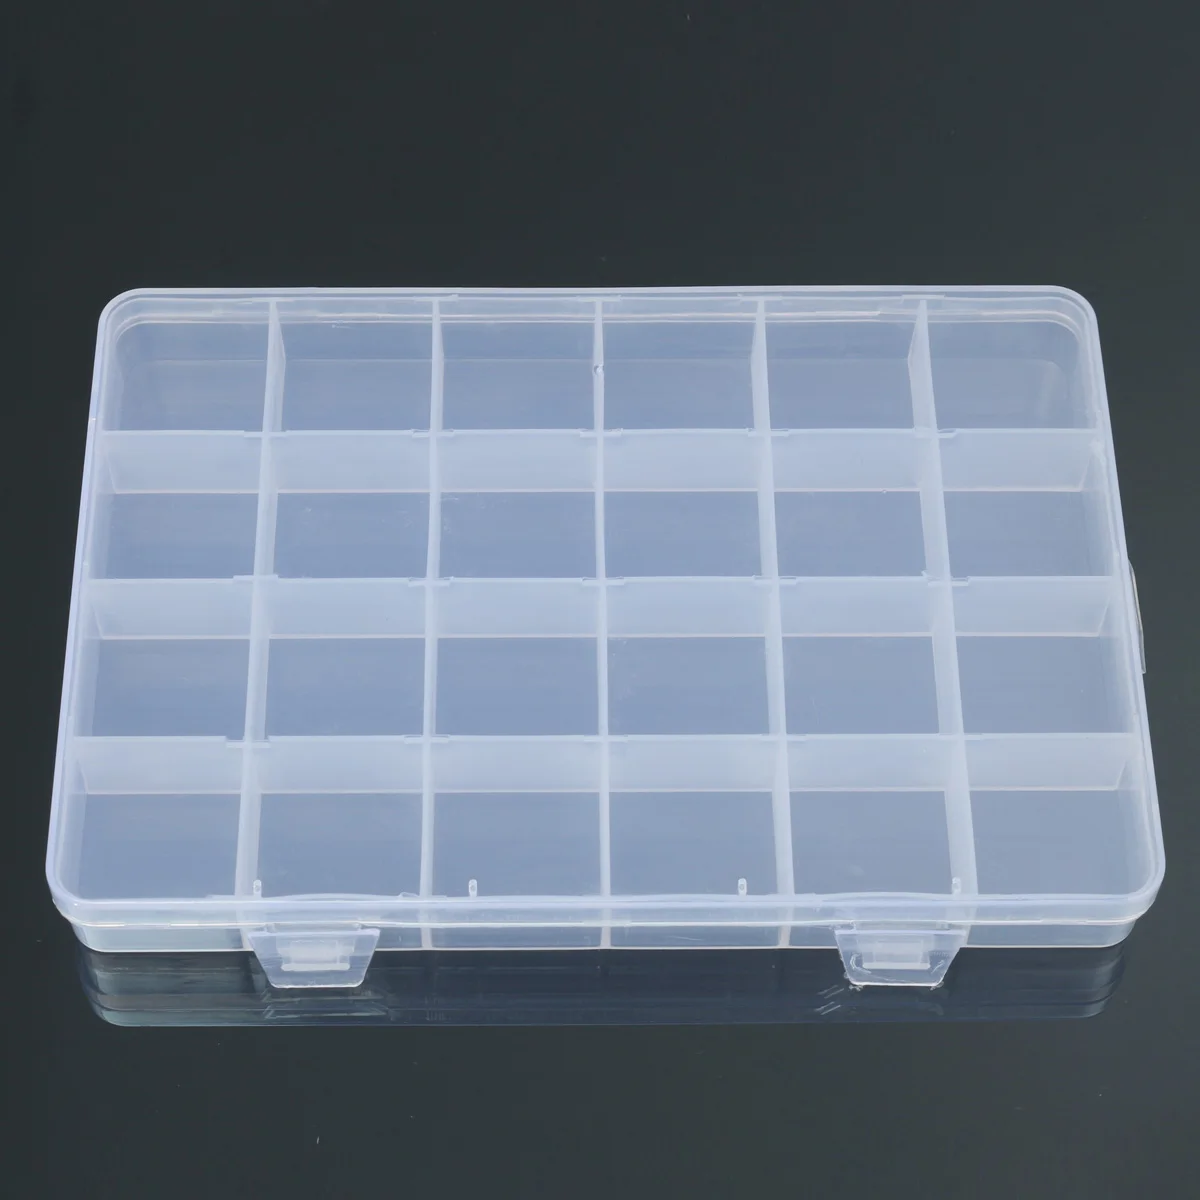 BUG HULL Craft Storage Container Jewelry Box with Adjustable Dividers for Beads Art DIY Crafts Jewelry Fishing Tackle Metal Parts Accessories Screws Button 2 Pack 24 Grids Clear Plastic Organizer Box 